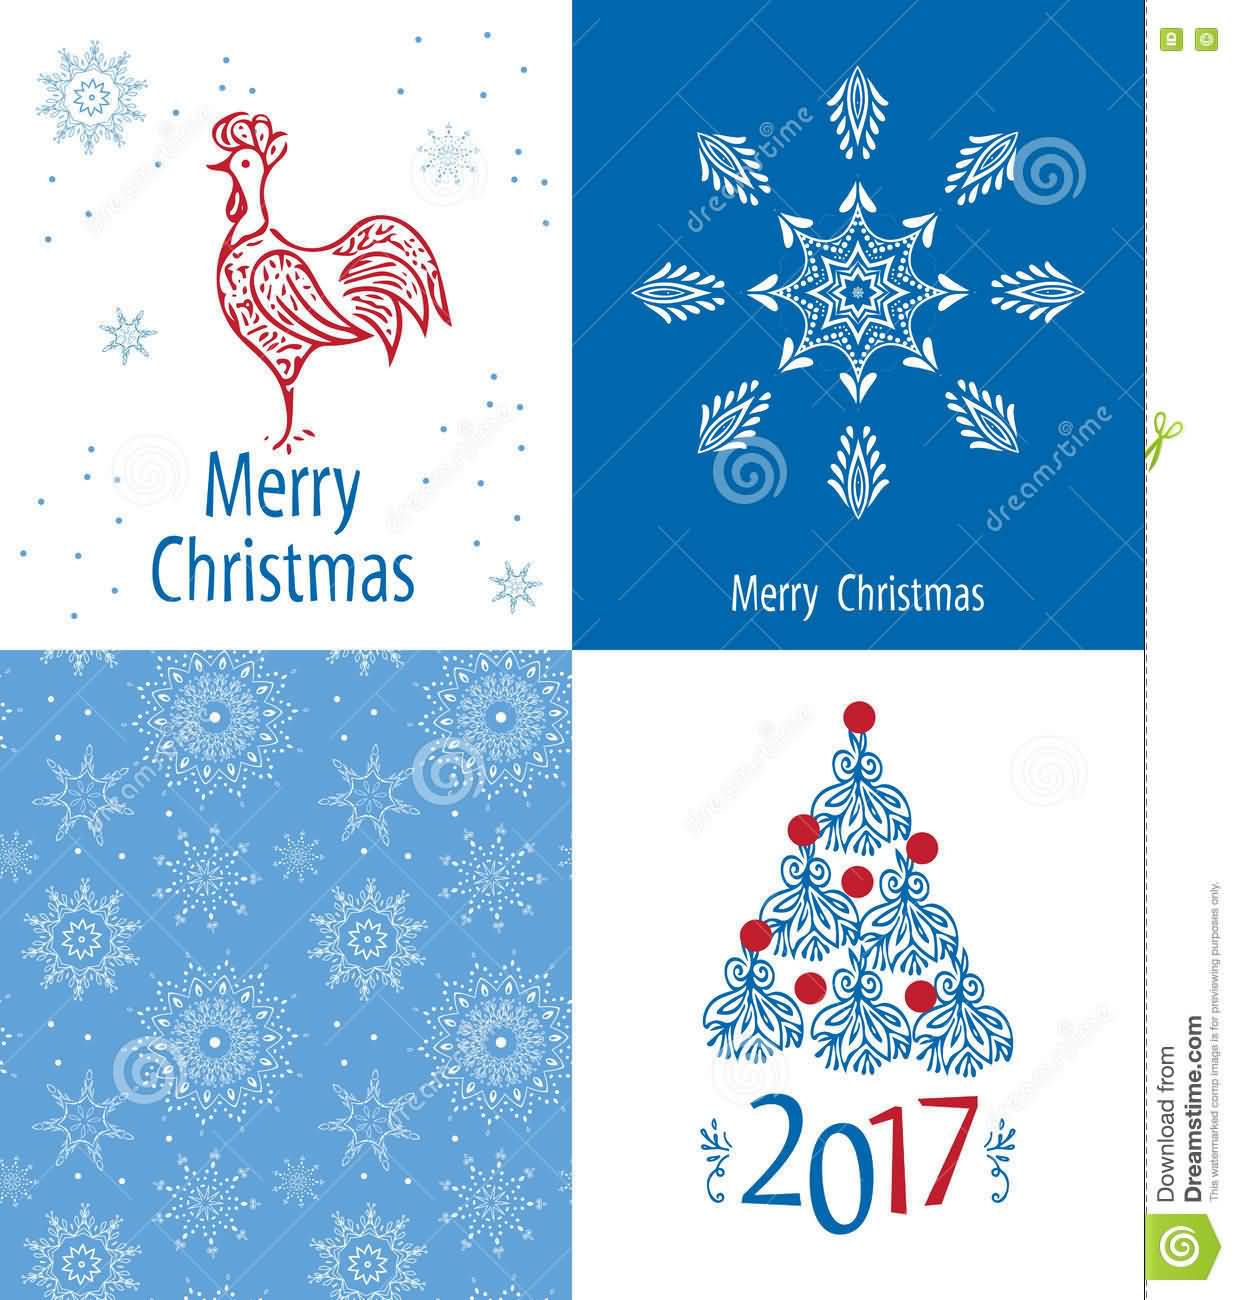 Christmas Cards 2017 Image Picture Photo Wallpaper 07